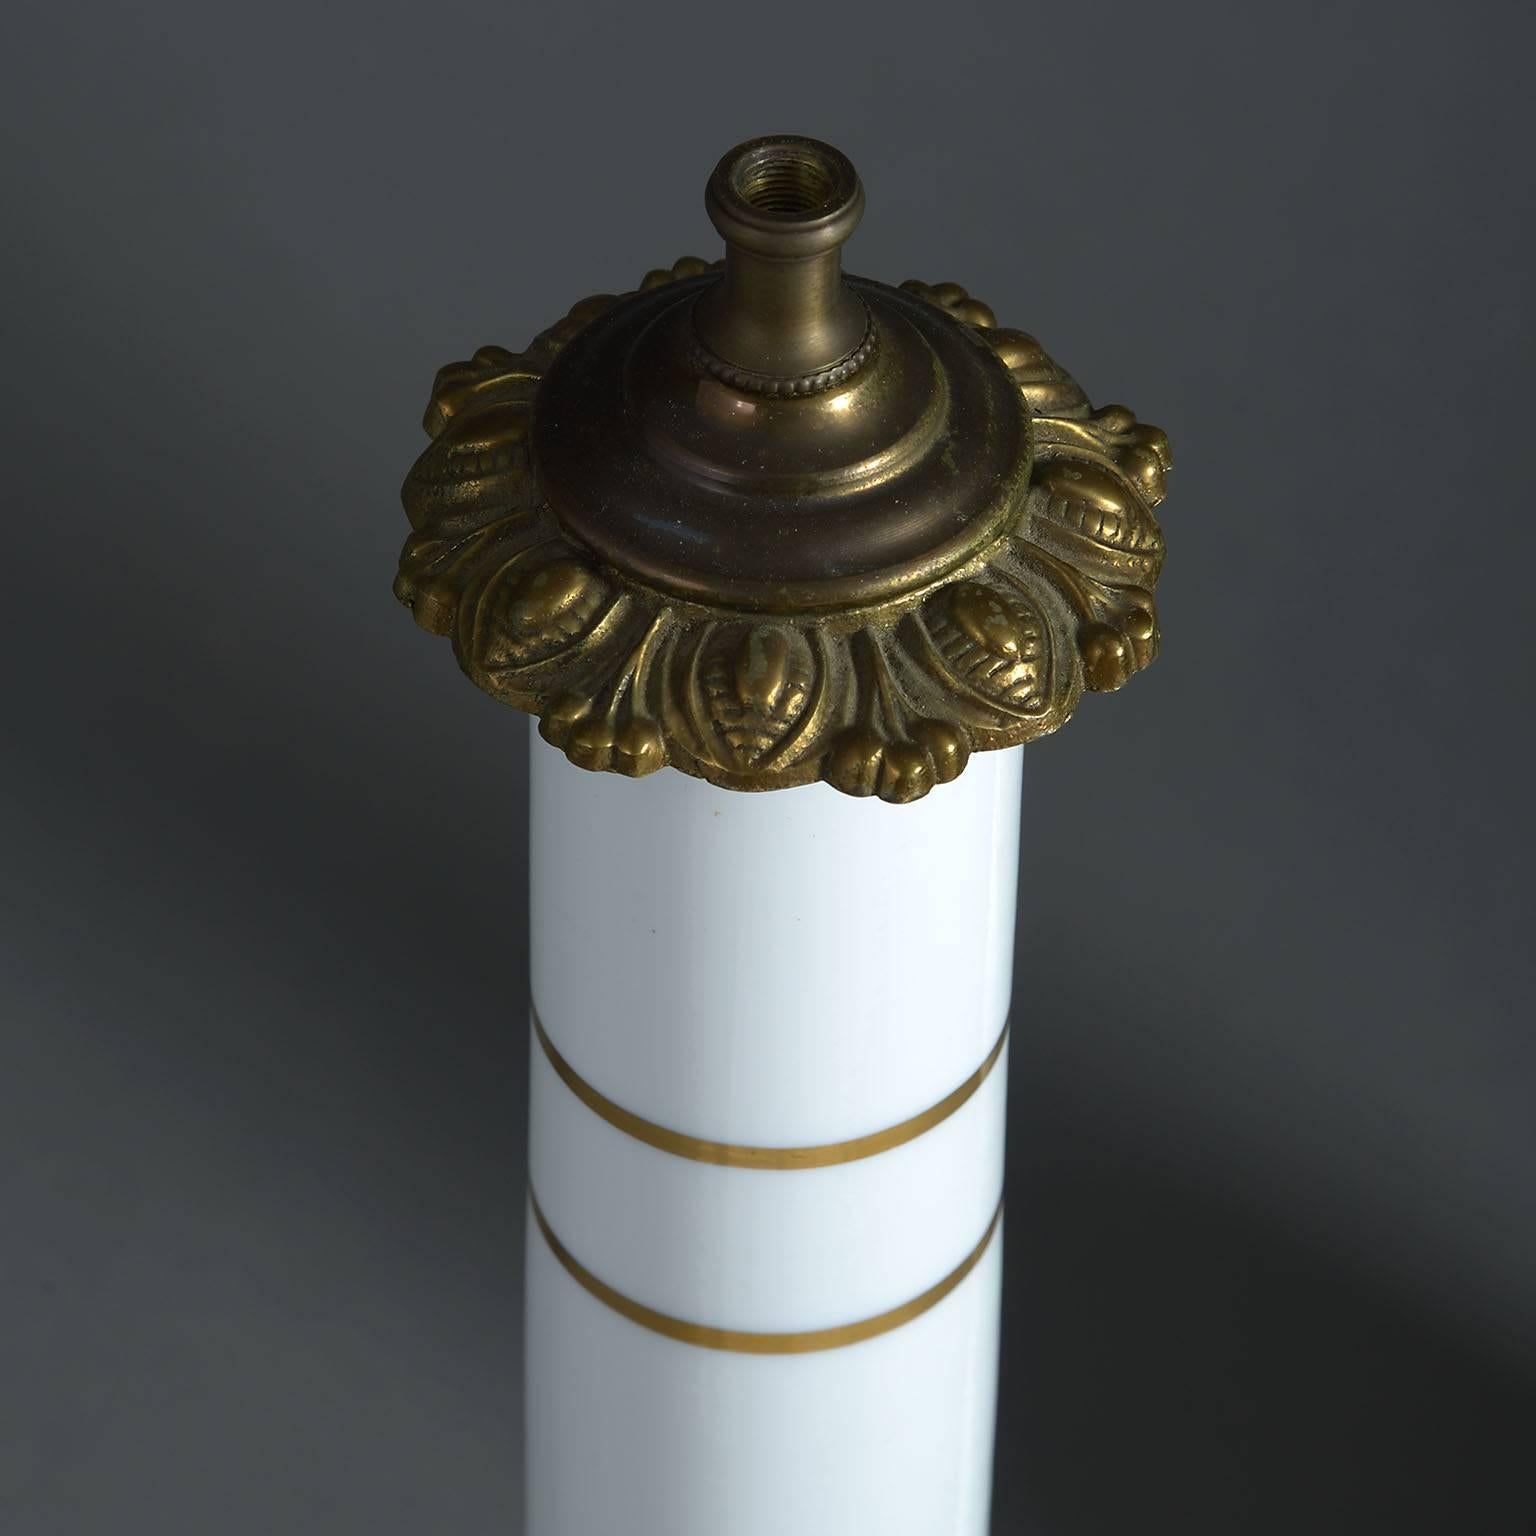 The mallet shaped body decorated with gilt bands and wide Greek-key on a milk-white ground and raised on a patinated brass base.

The price includes wiring.